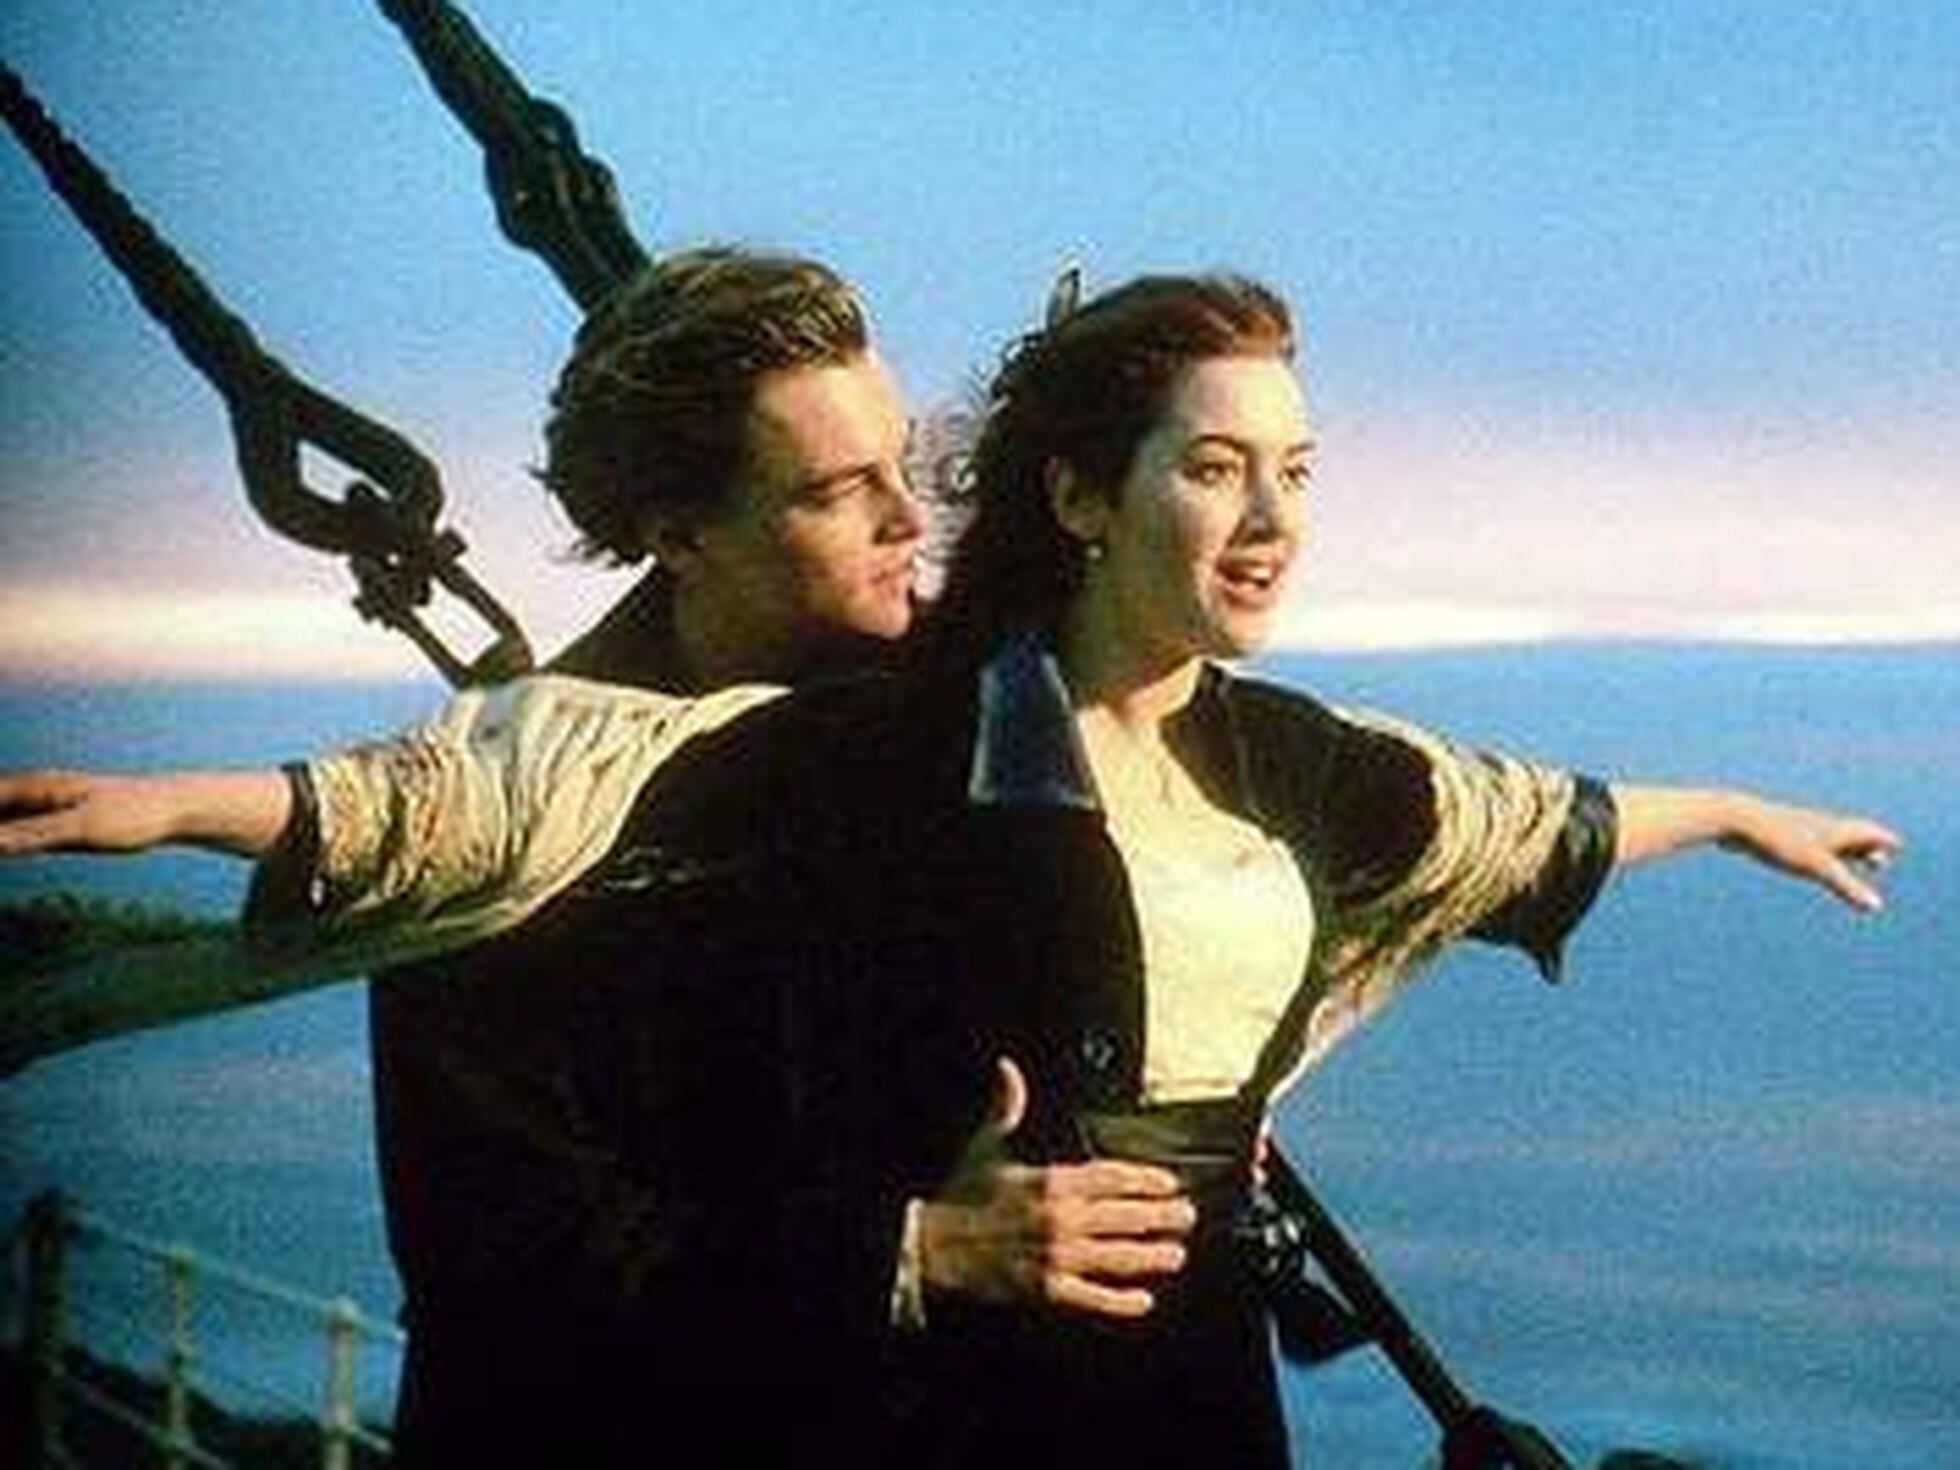 James Cameron did the experiment: Titanic's Jack probably wouldn't